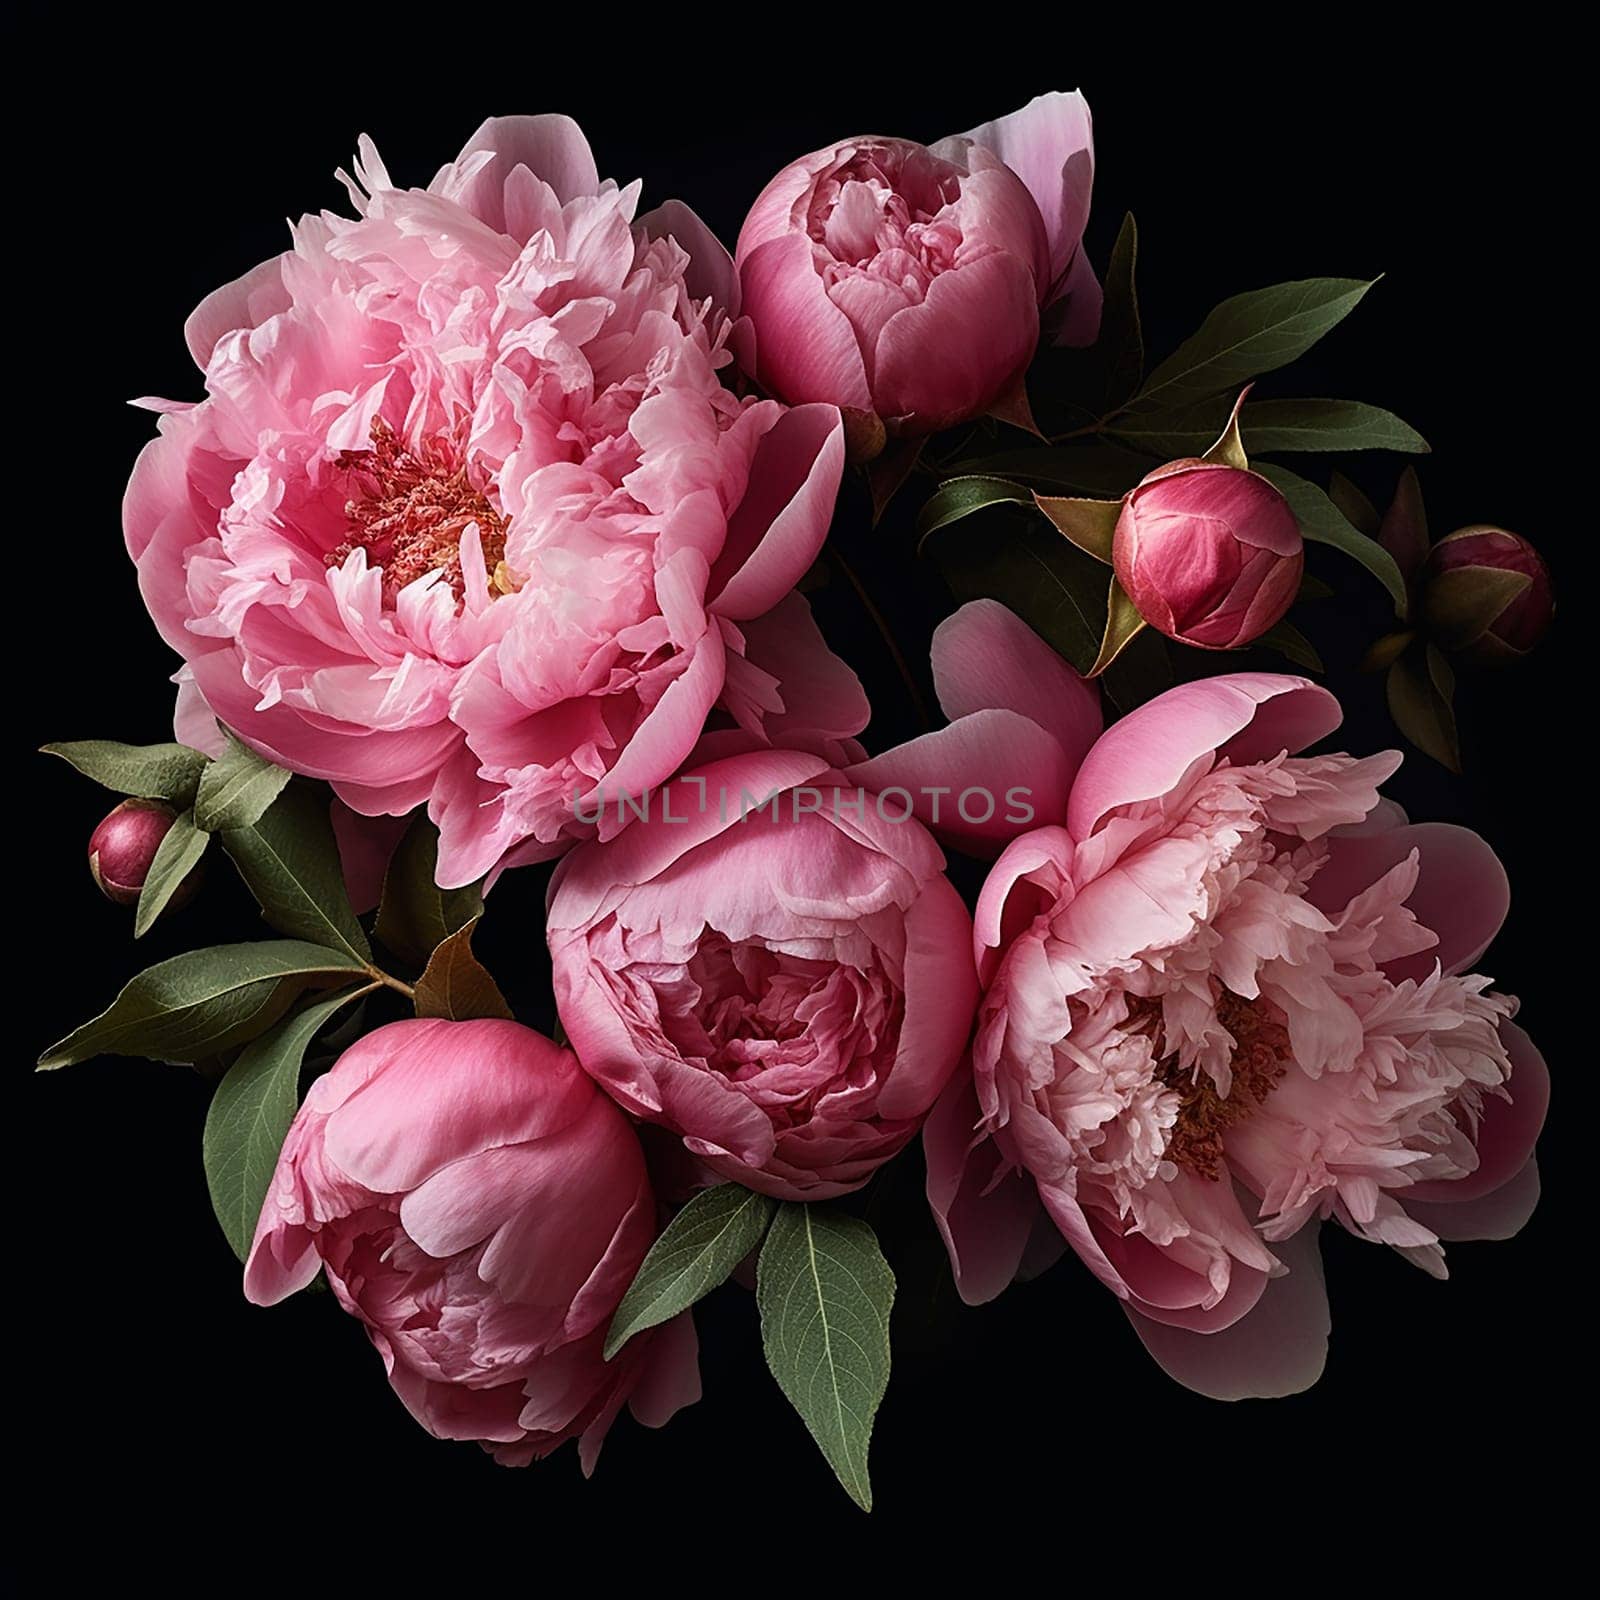 A bouquet of pink peonies against a dark background, highlighting their delicate petals and vibrant color.